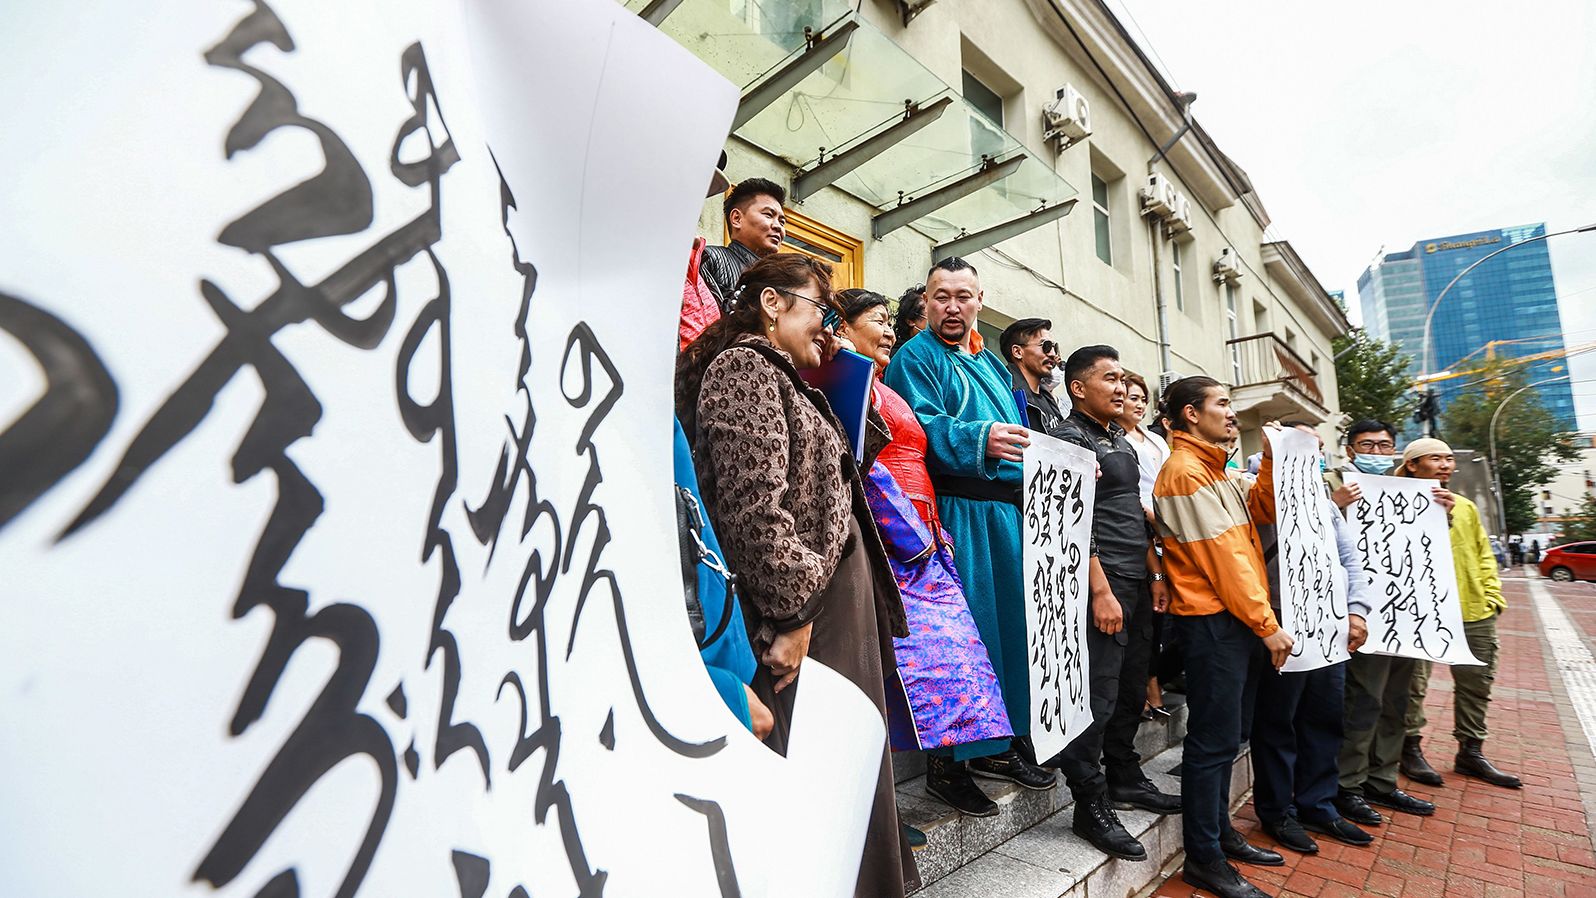 Mongolian citizens protest at the Ministry of Foreign Affairs in Ulaanbaatar, the capital of Mongolia, against China's plan to reduce teaching in Mongolian at schools in the neighboring Chinese region of Inner Mongolia on August 31, 2020.